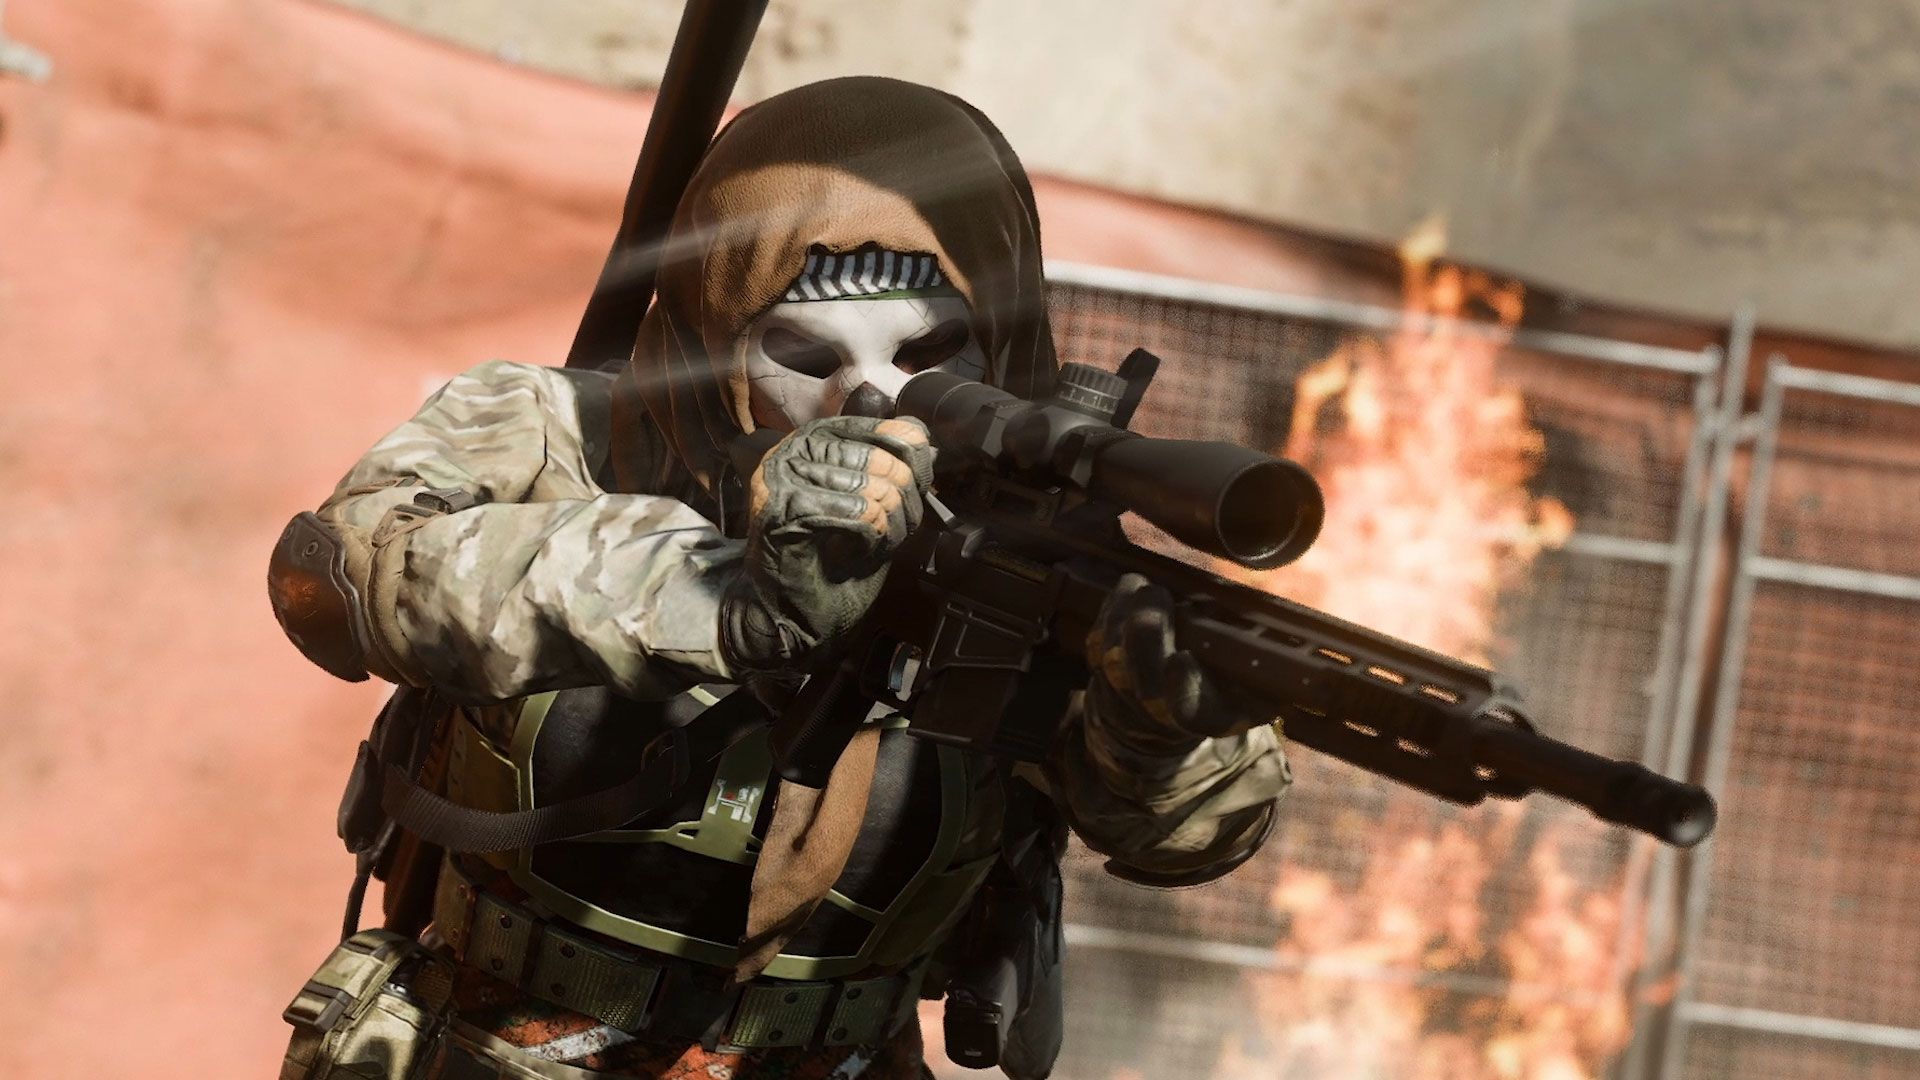 In this article, we are going to be covering how to fix MW2 Vault Edition not working, so you can get all of the benefits that you paid for with your hard-earned cash.